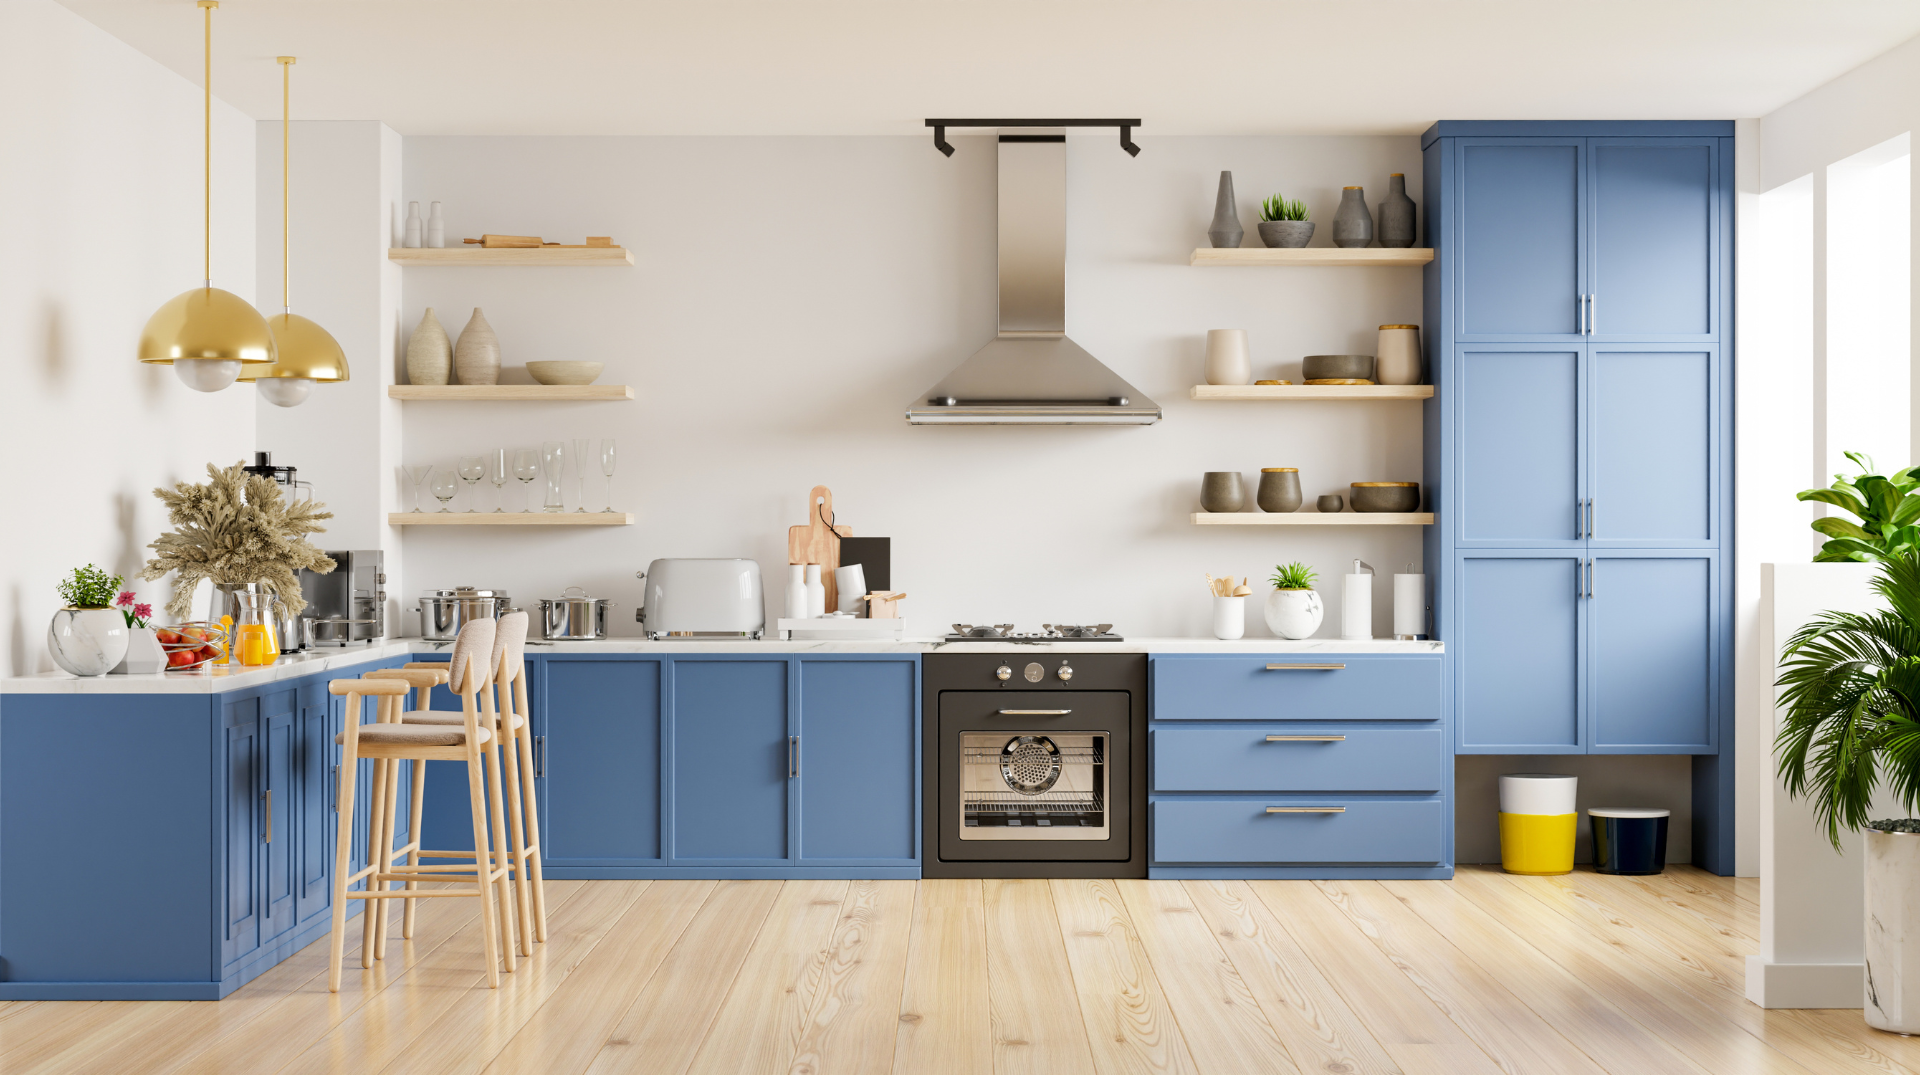 rta cabinets by Delta Woodworks - light blue kitchen cabinets